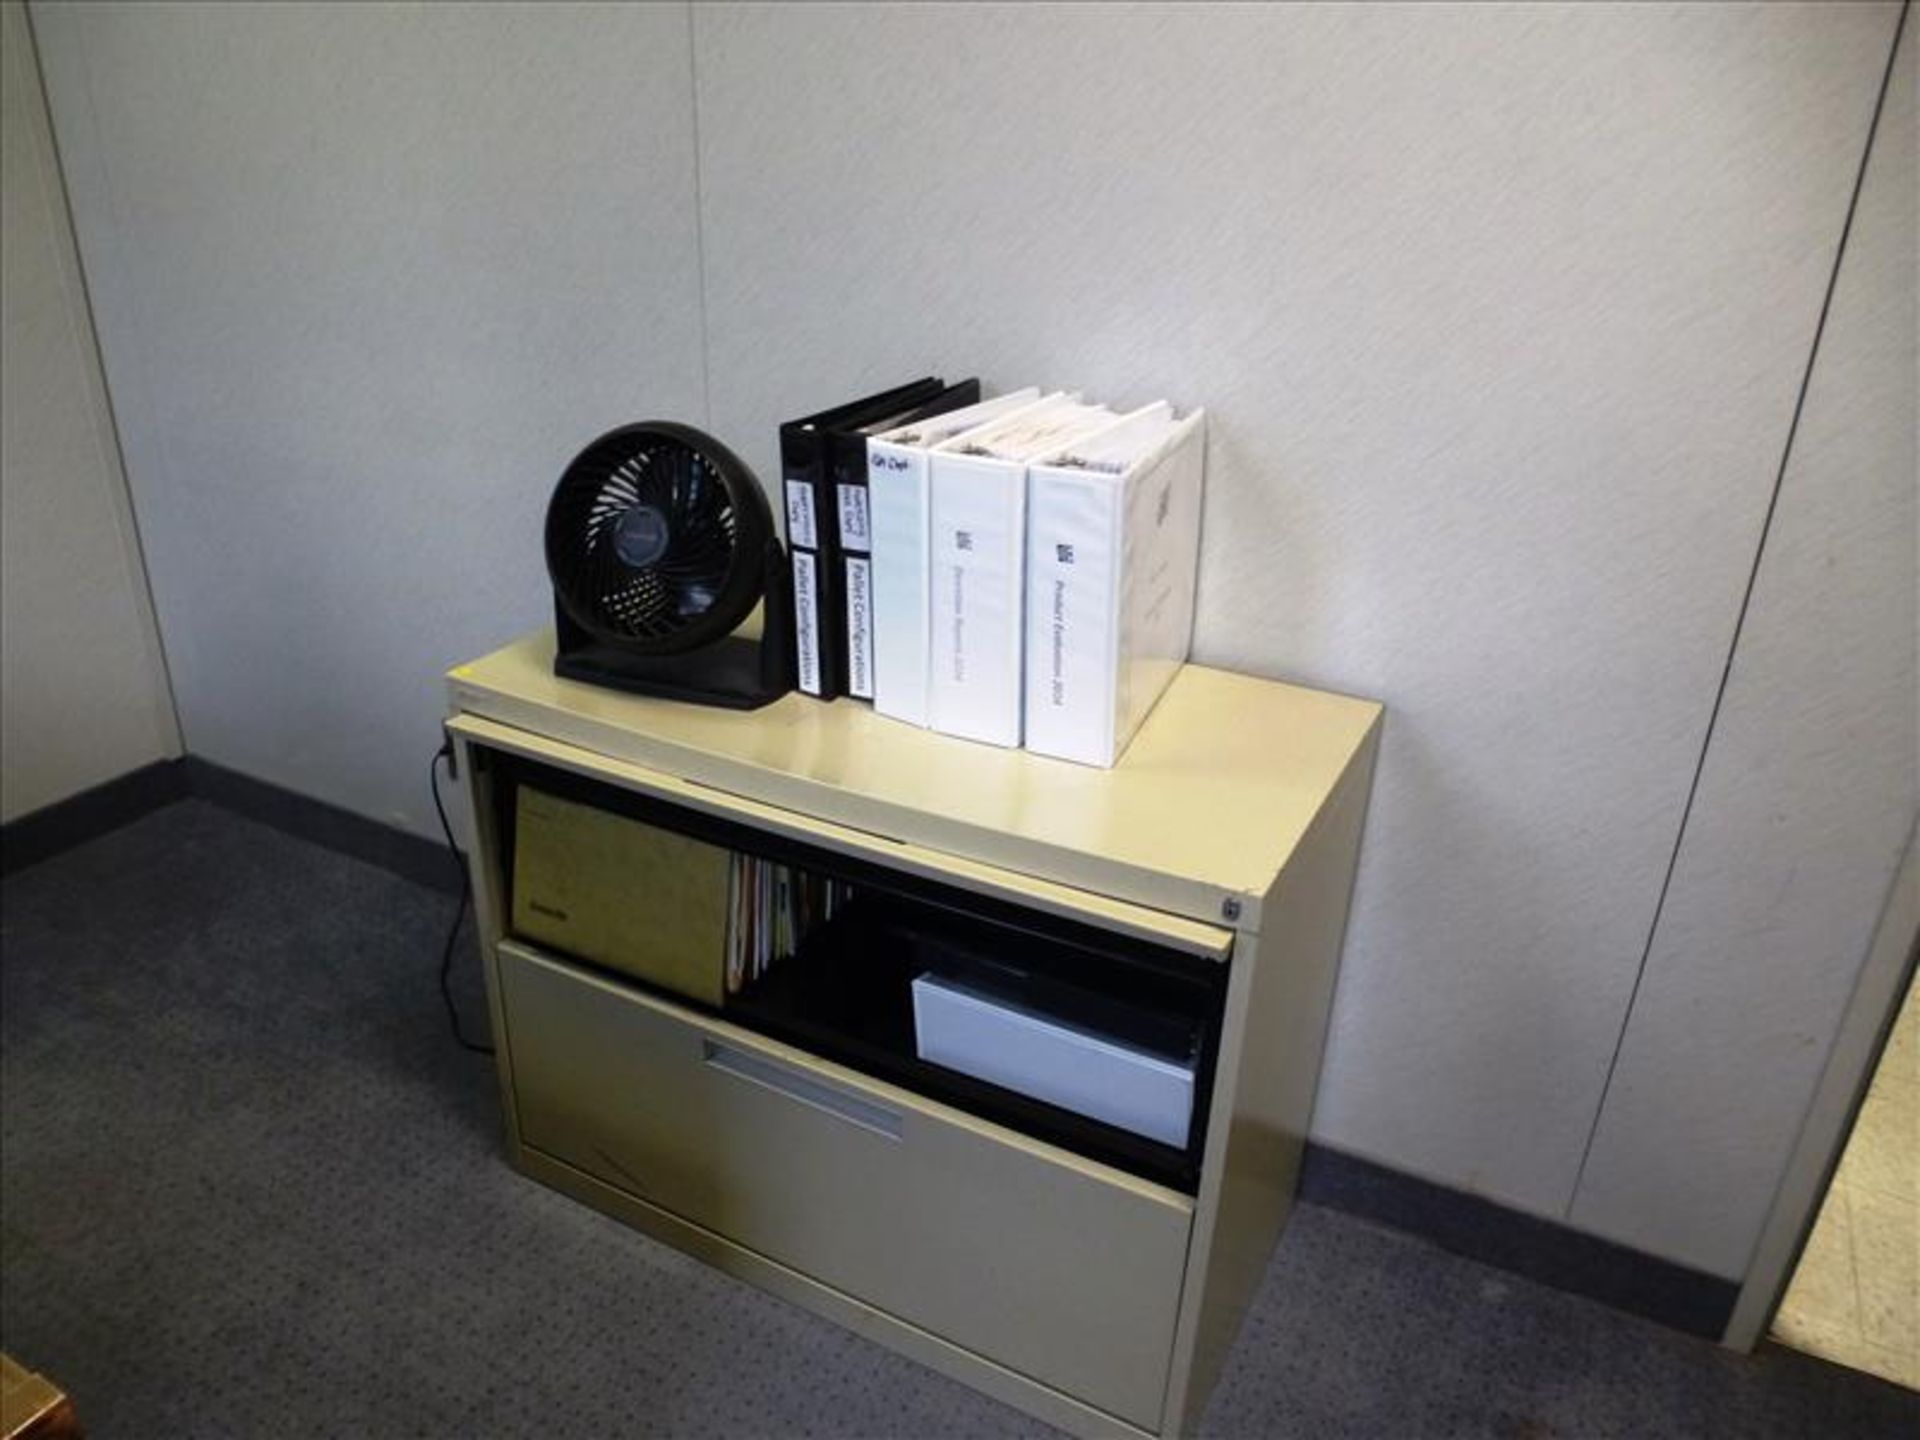 Office No. 4 (Product Development) - office furniture contents only (located at 150 Bartor Rd - Image 2 of 2